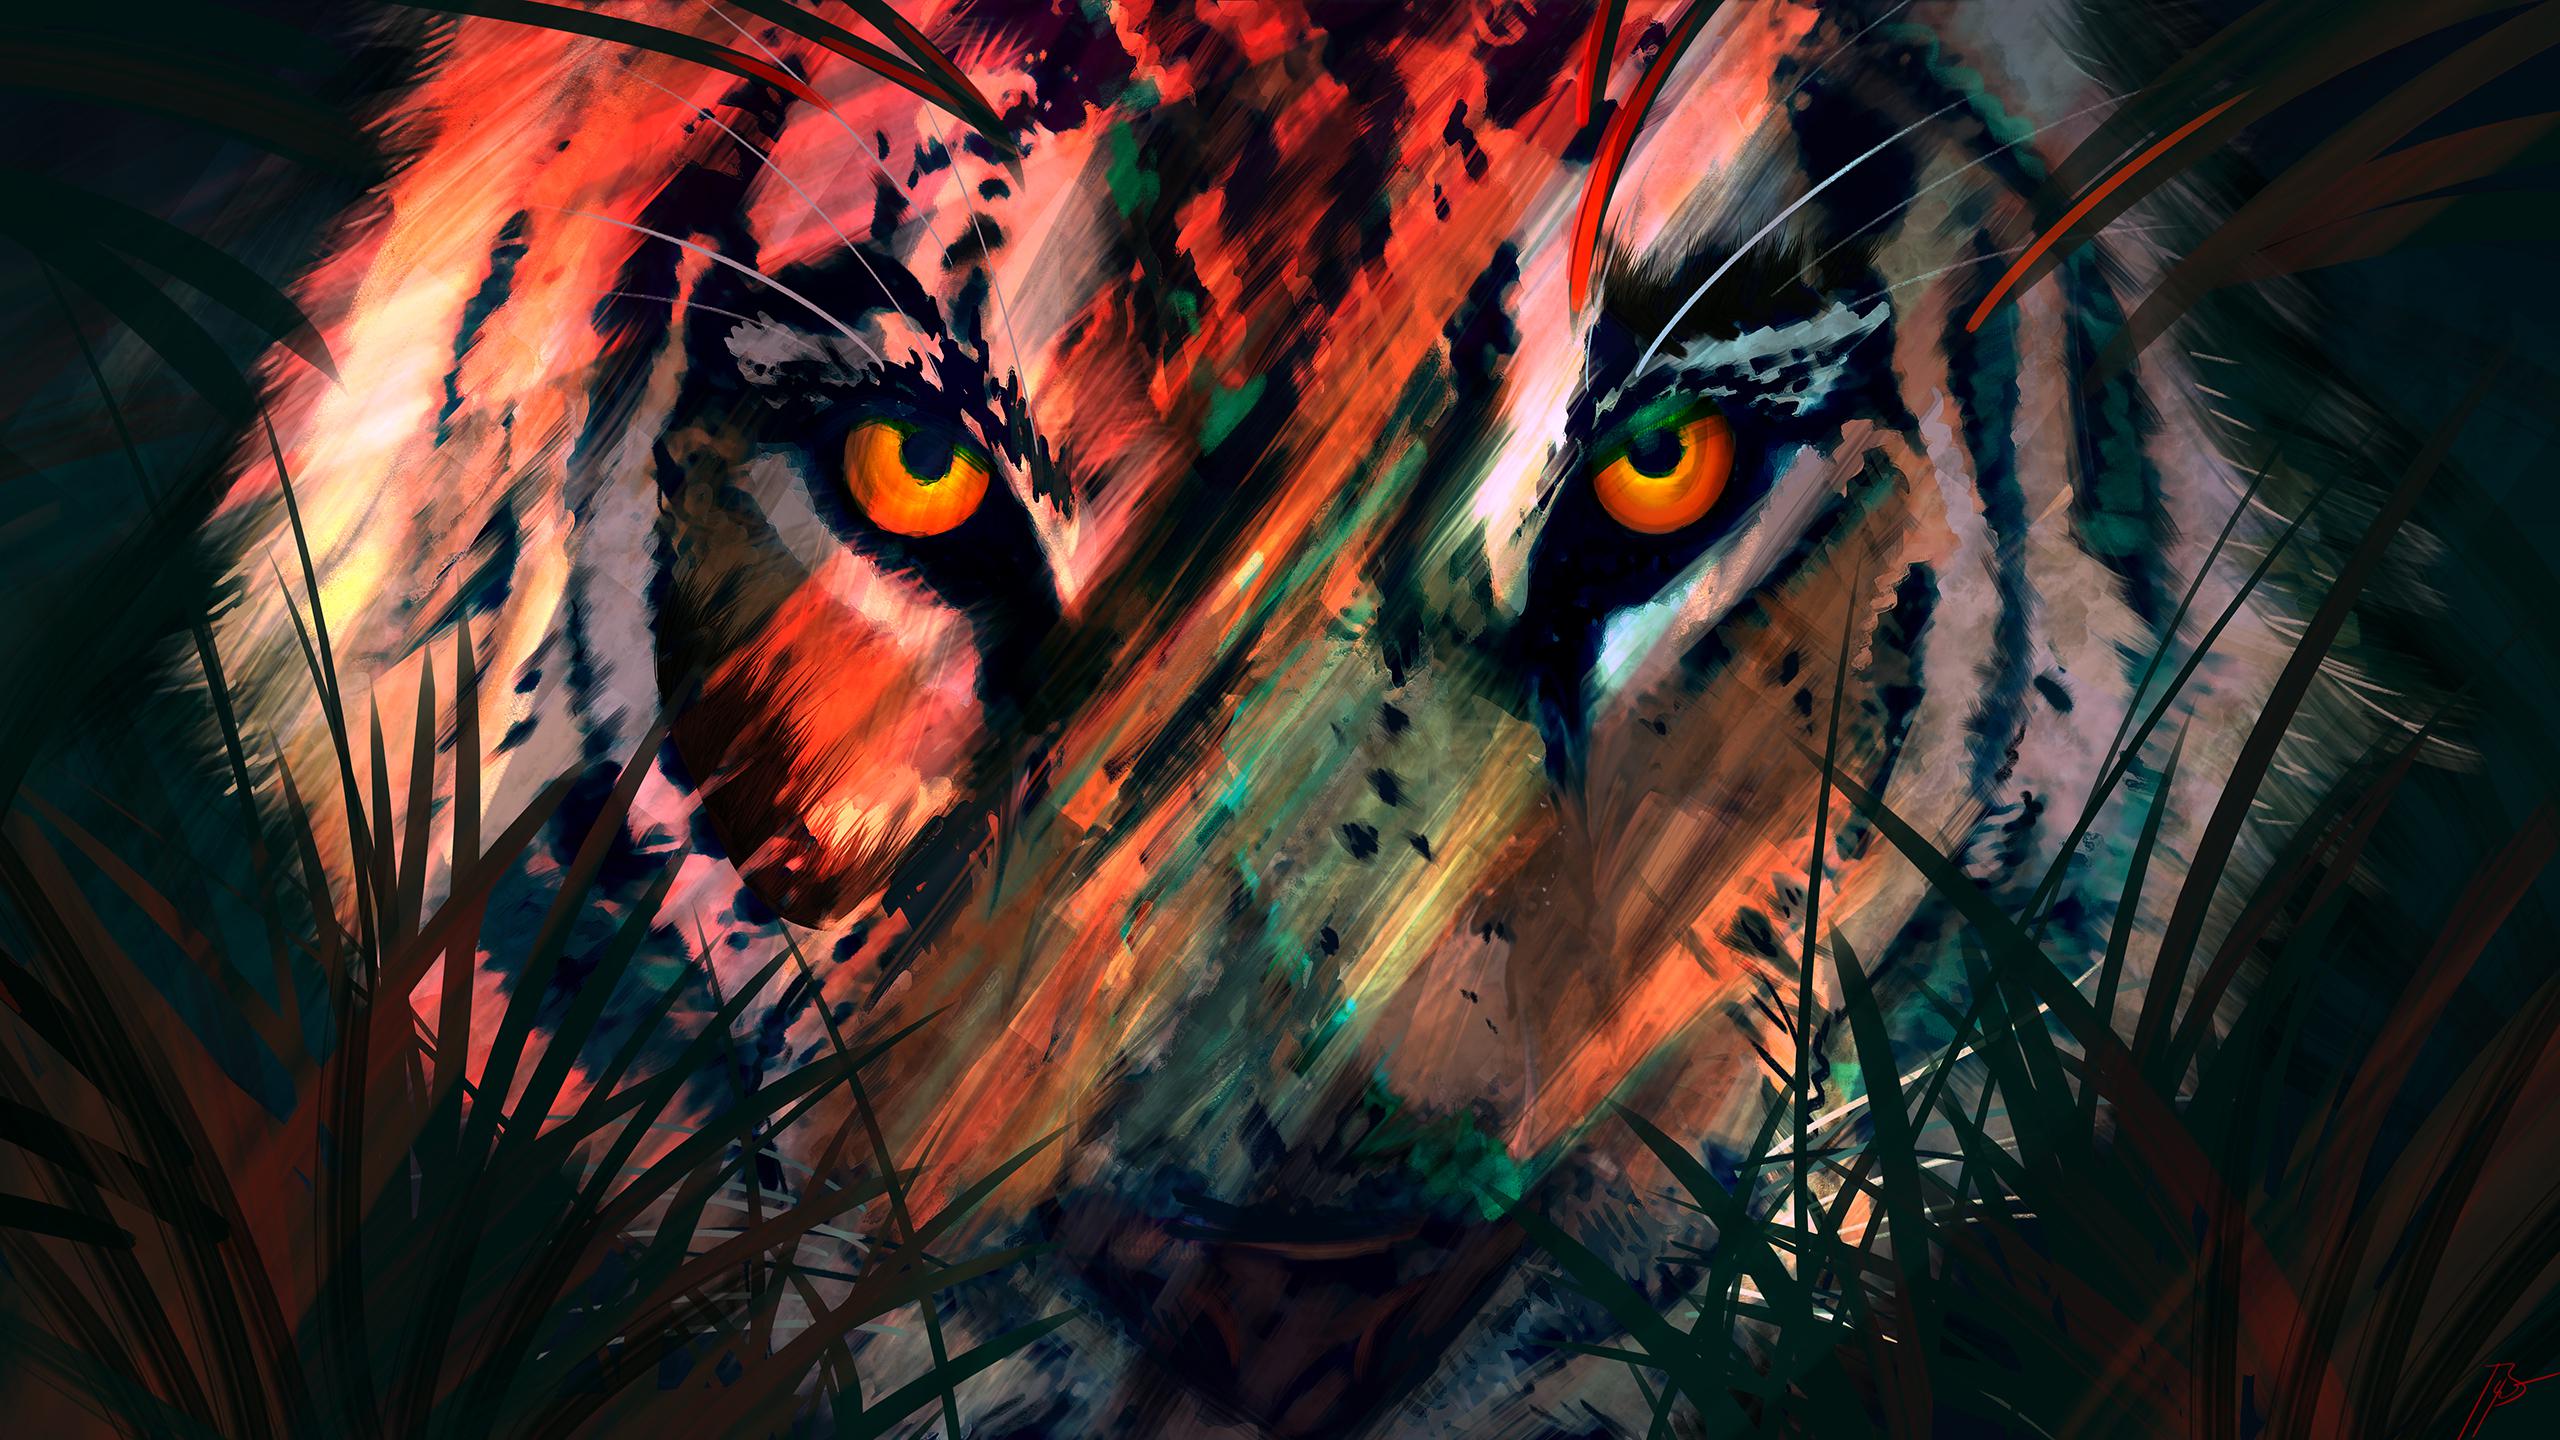 ultra hd wallpapers,illustration,art,graphic design,eye,painting